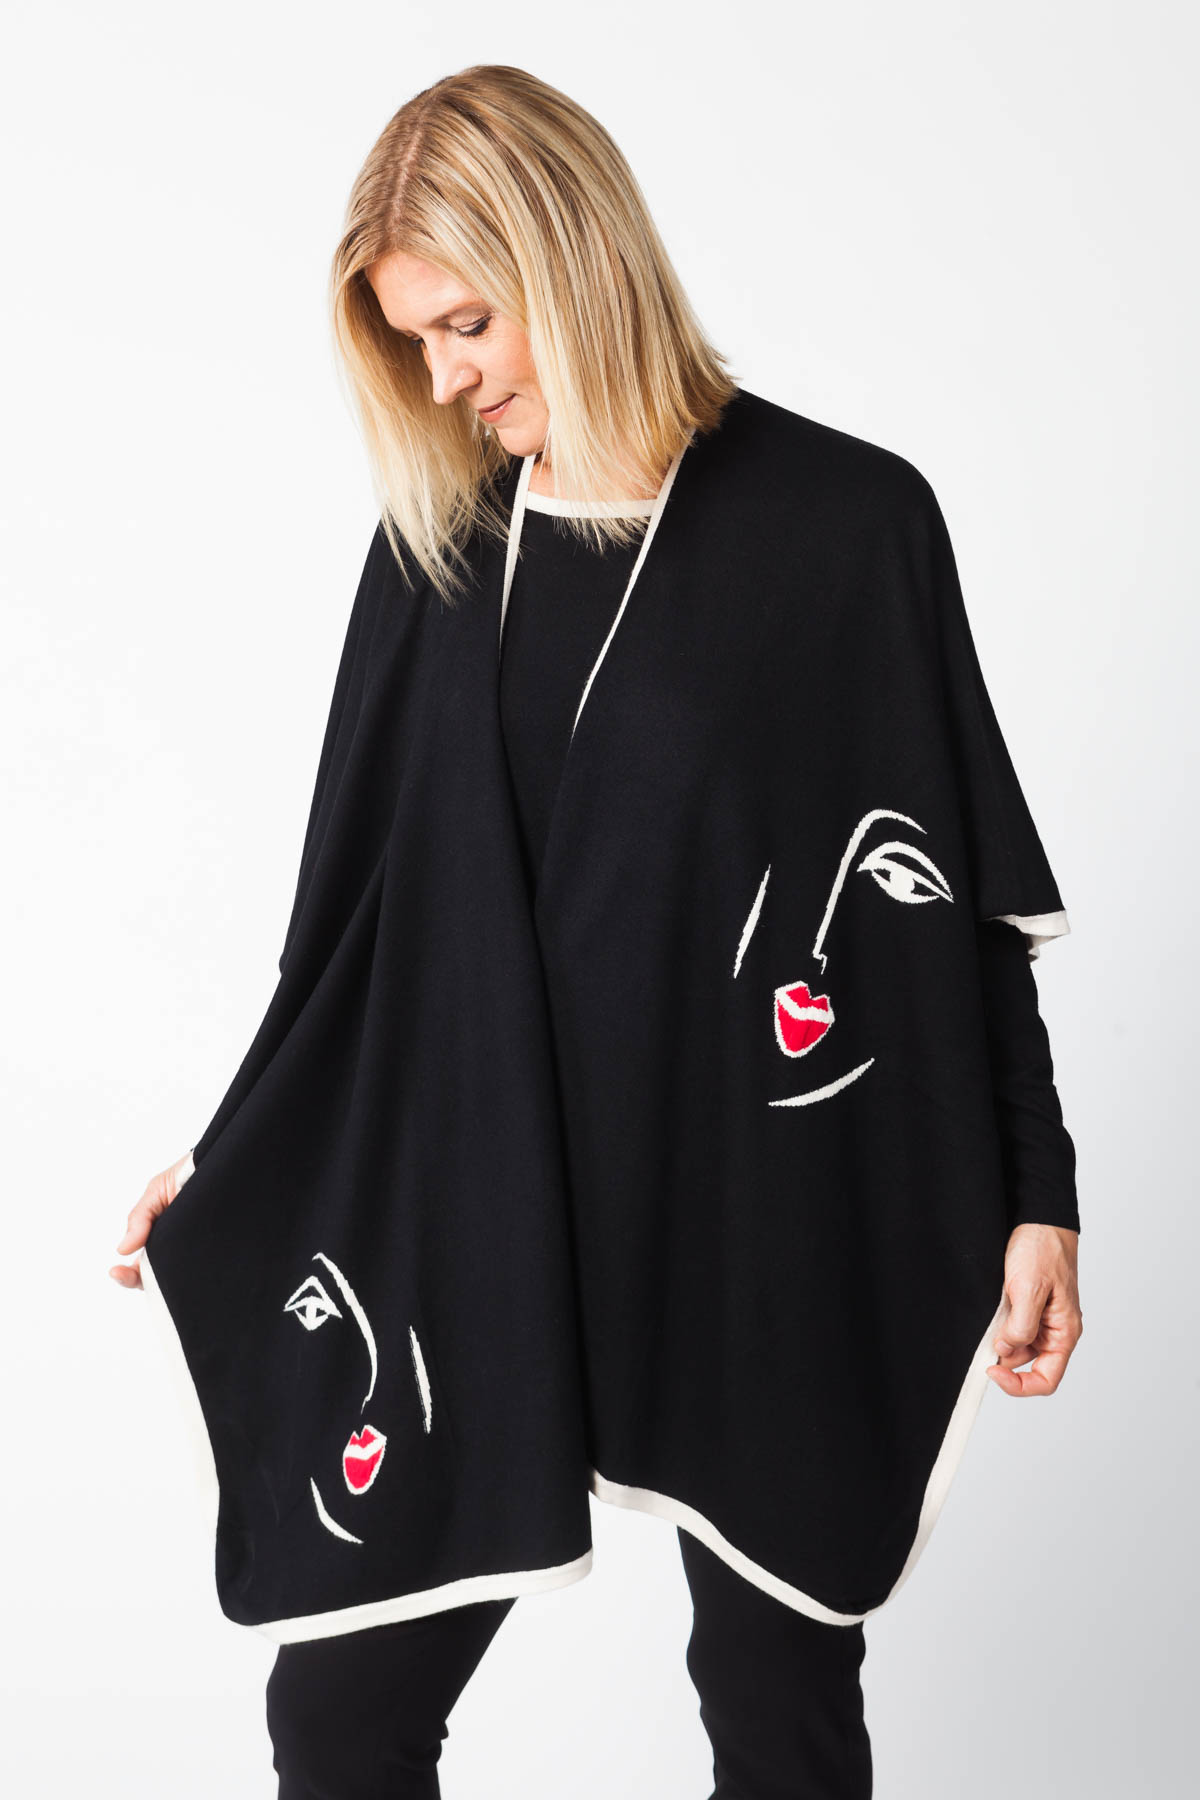 Ecommerce photo of woman in poncho